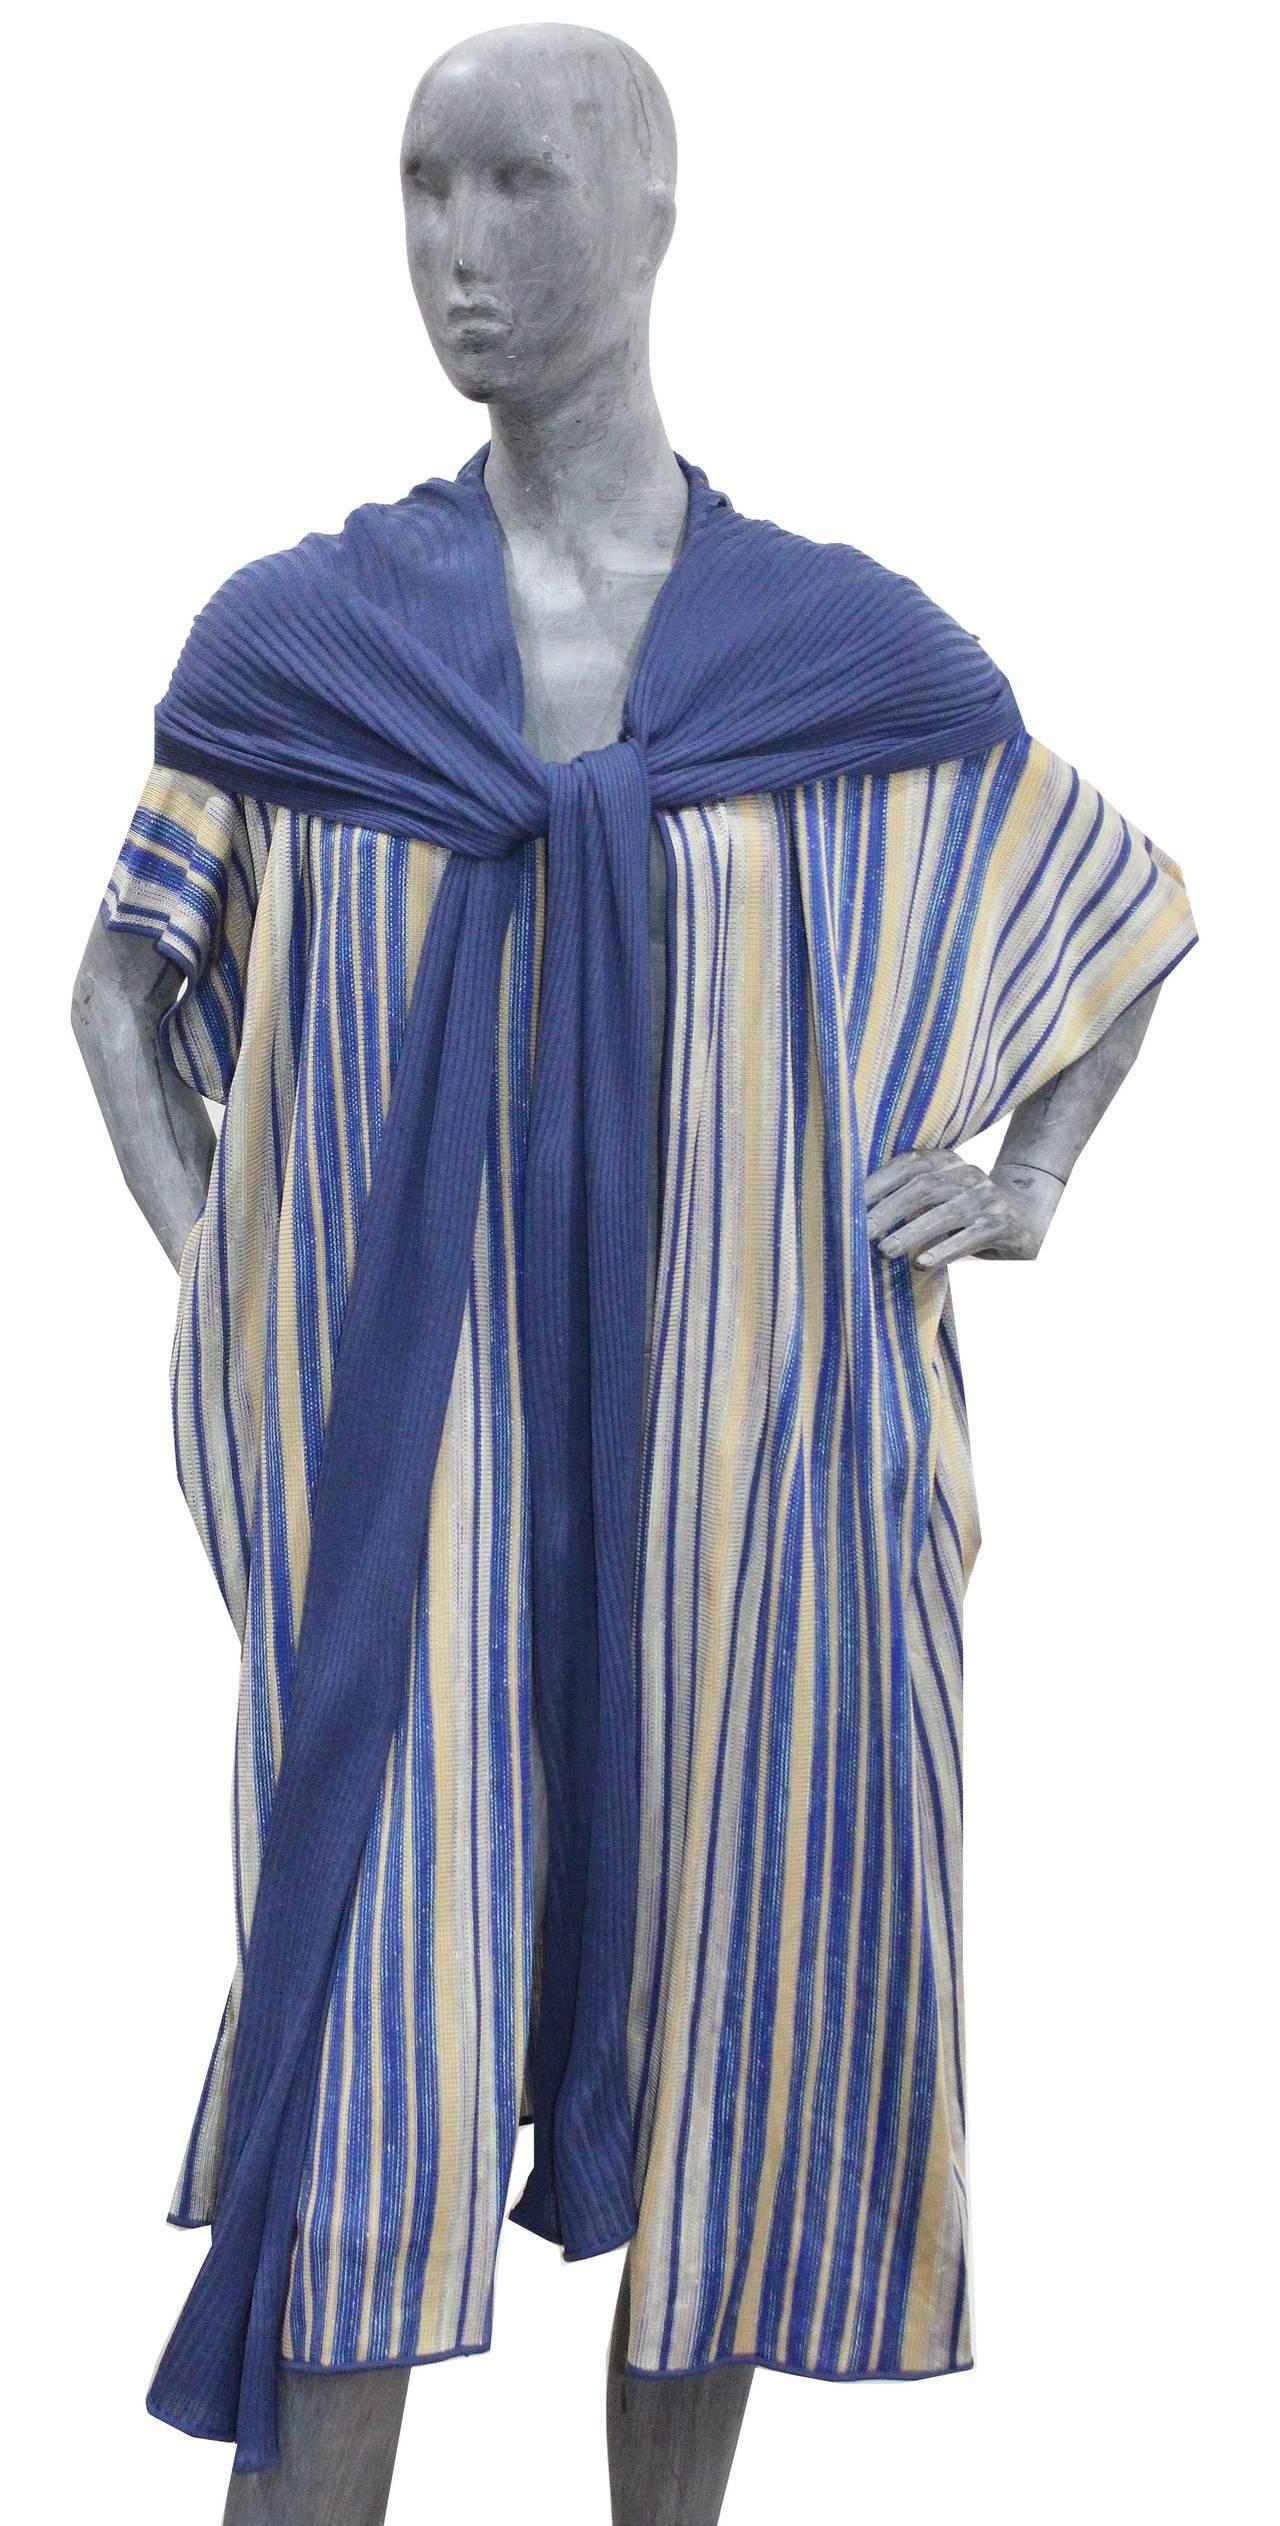 Women's Important Issey Miyake 2 Piece Knitted Dress Ensemble c. 1976